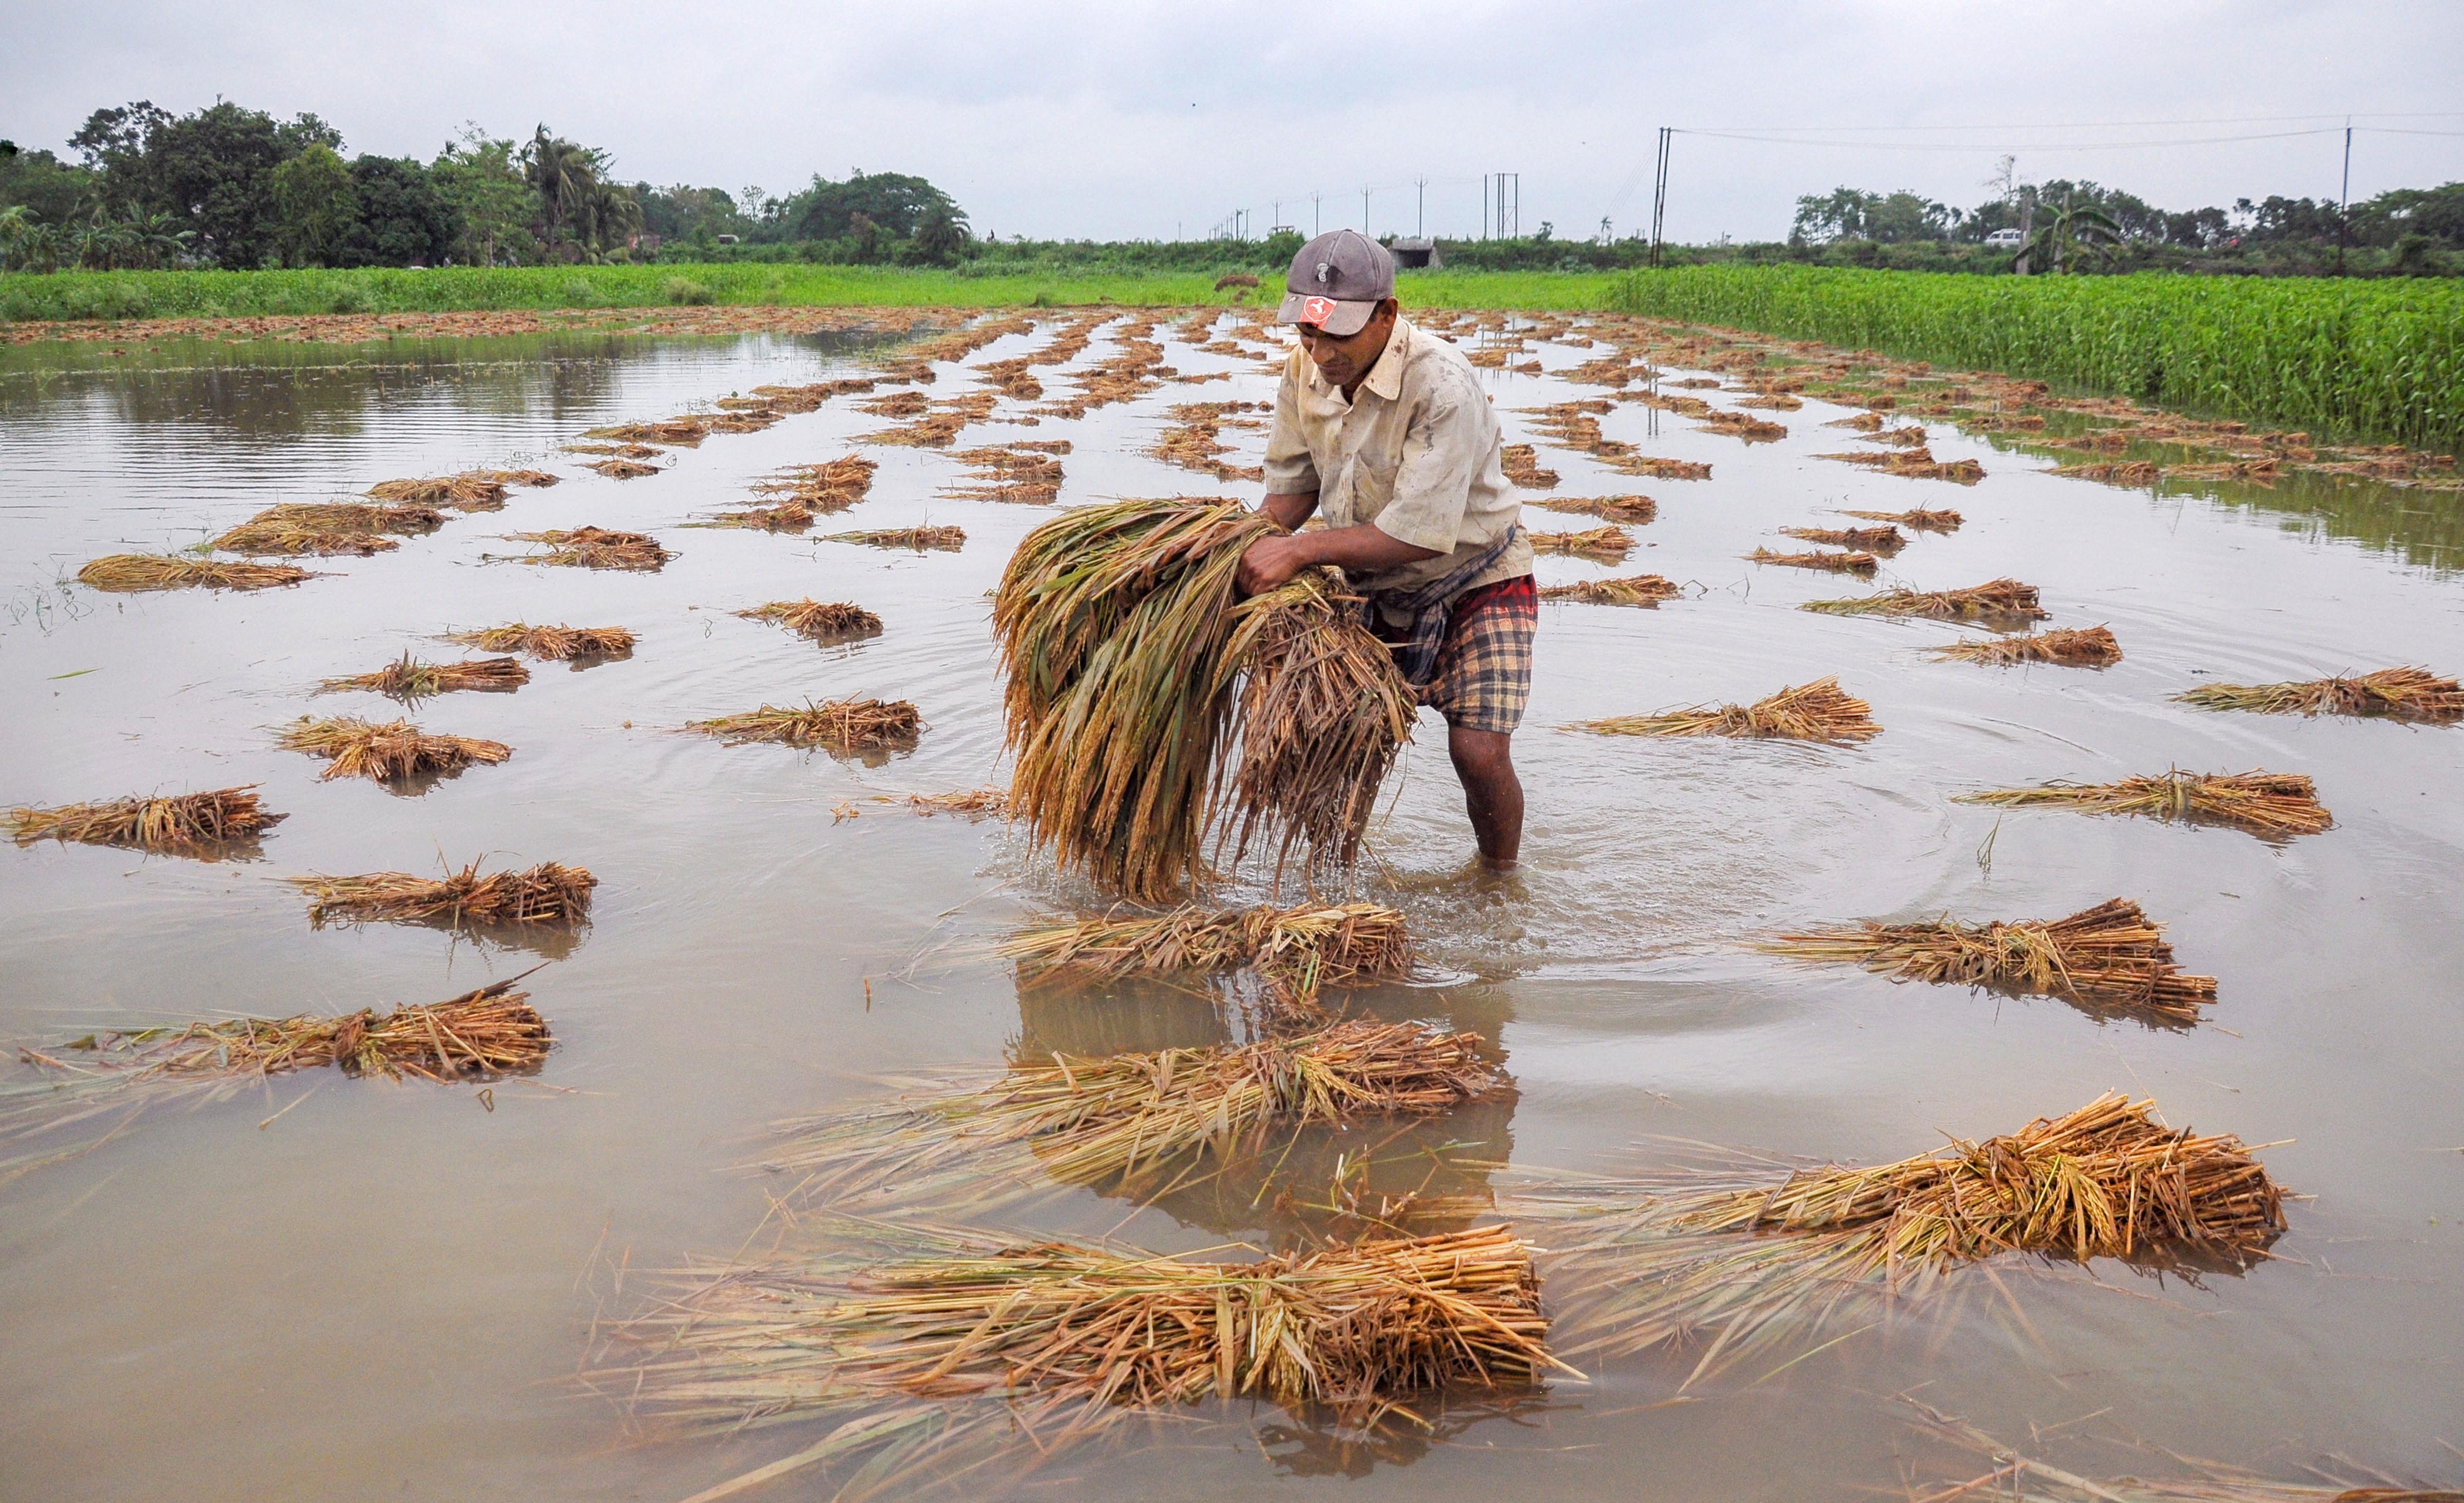 A farmer tries to recover harvested paddy bunches from a flooded field after rains caused by Cyclone Amphan, at Ranaghat in Nadia district. (PTI photo)